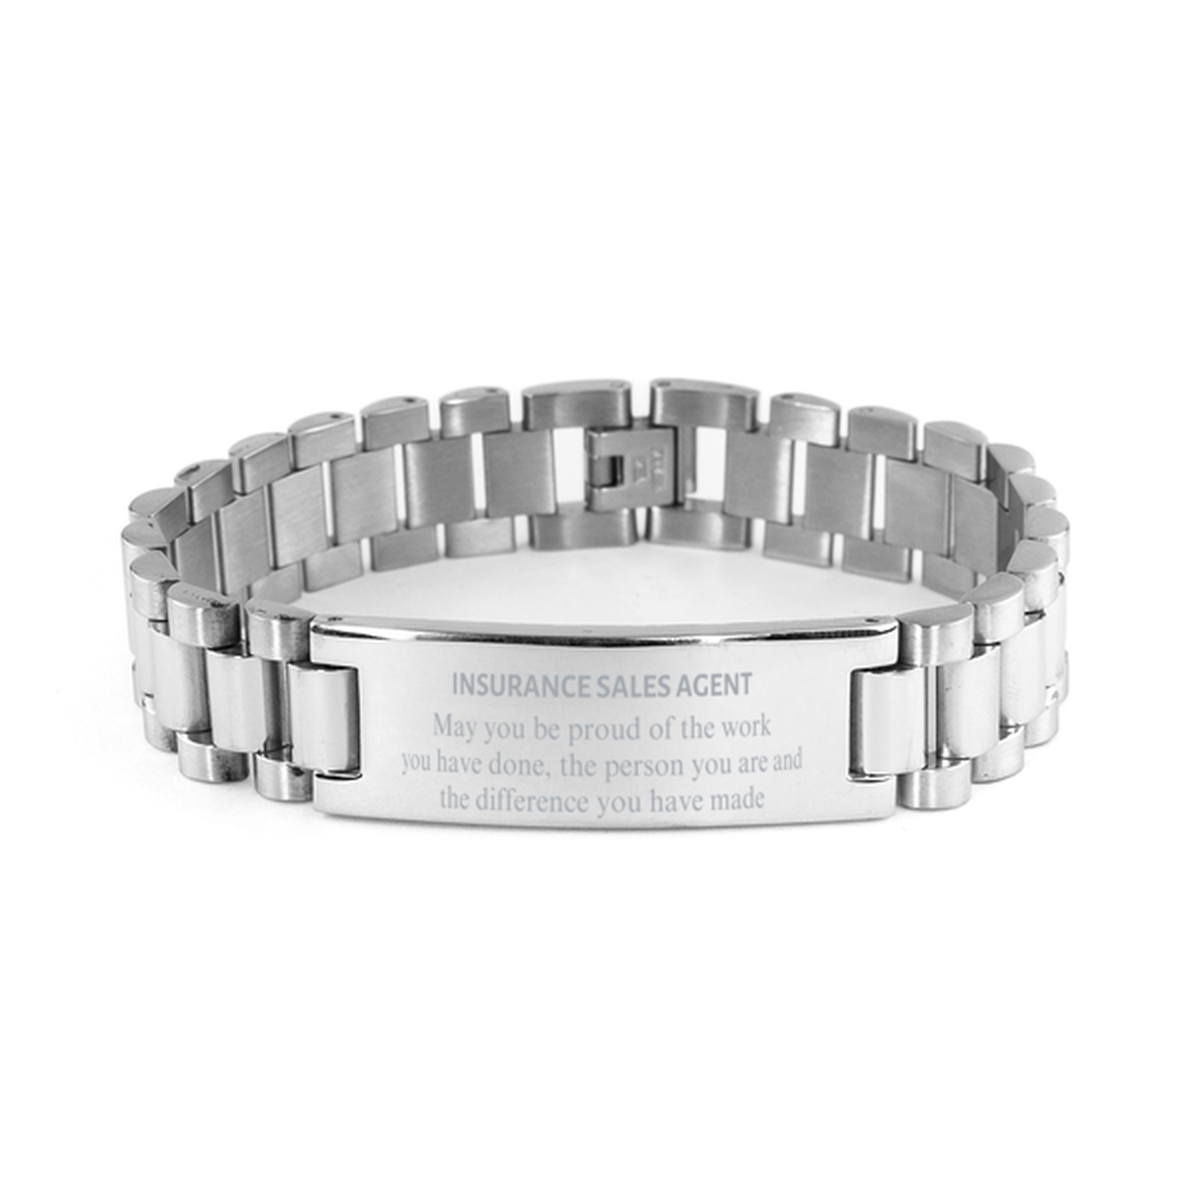 Insurance Sales Agent May you be proud of the work you have done, Retirement Insurance Sales Agent Ladder Stainless Steel Bracelet for Colleague Appreciation Gifts Amazing for Insurance Sales Agent